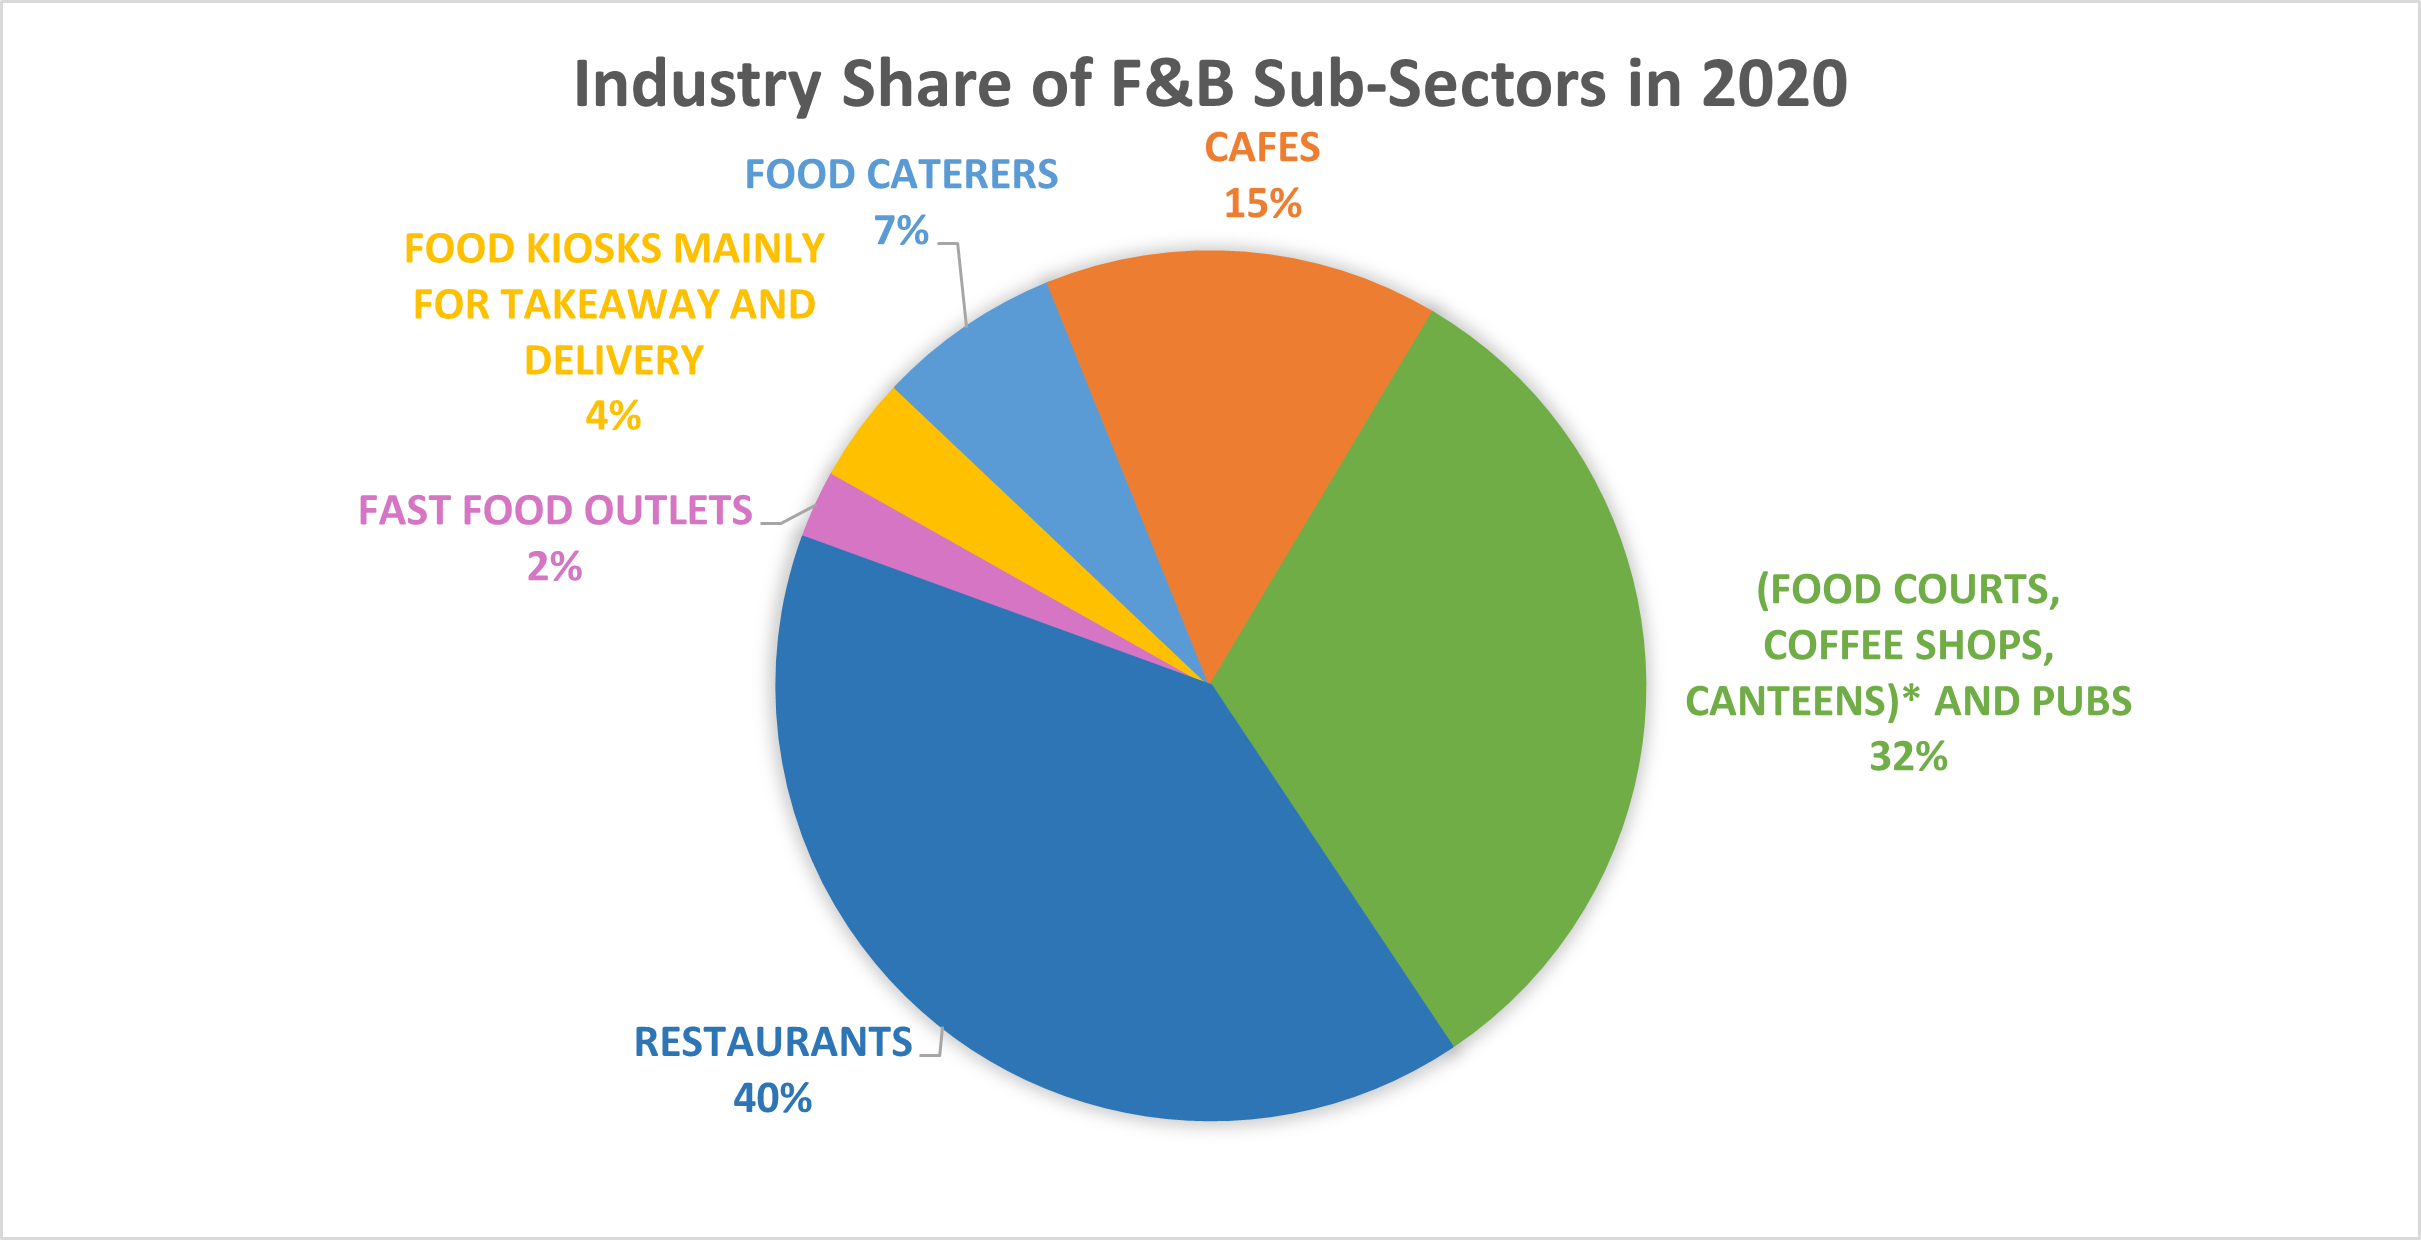 Breakdown of F&B businesses by sub-sectors in 2020